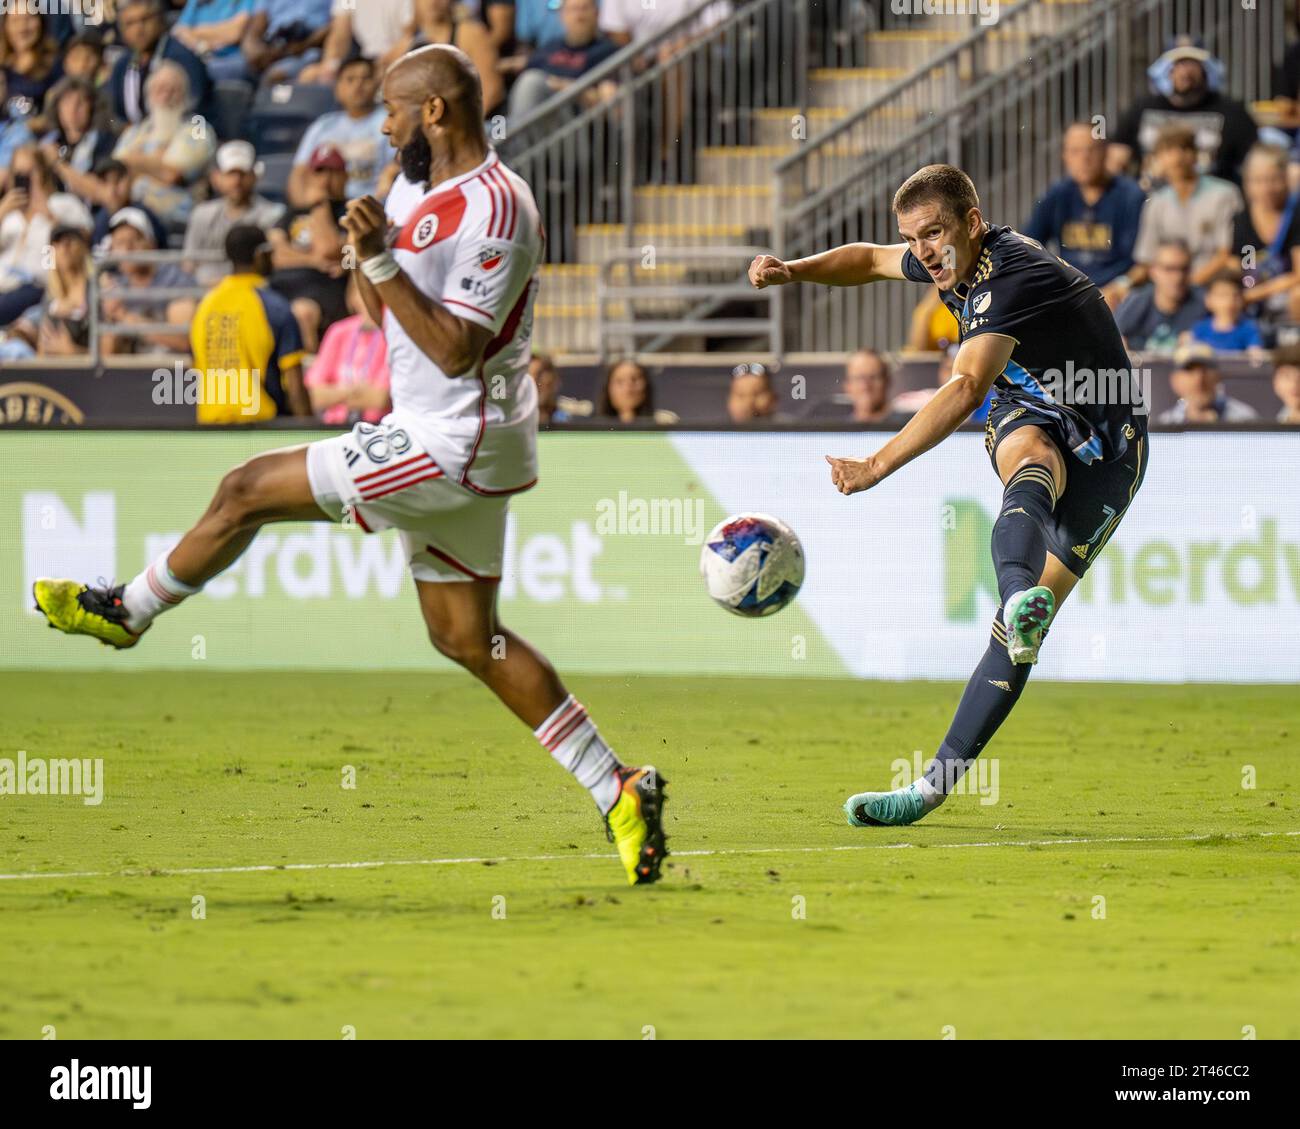 Mikael Uhre footballer for the Philadelphia Union strikes the ball for a shot on goal against the New England Revolution during an MLS soccer match. Action on the pitch of a Major League Soccer game in the USA / United States  Credit: Don Mennig / Alamy News Stock Photo